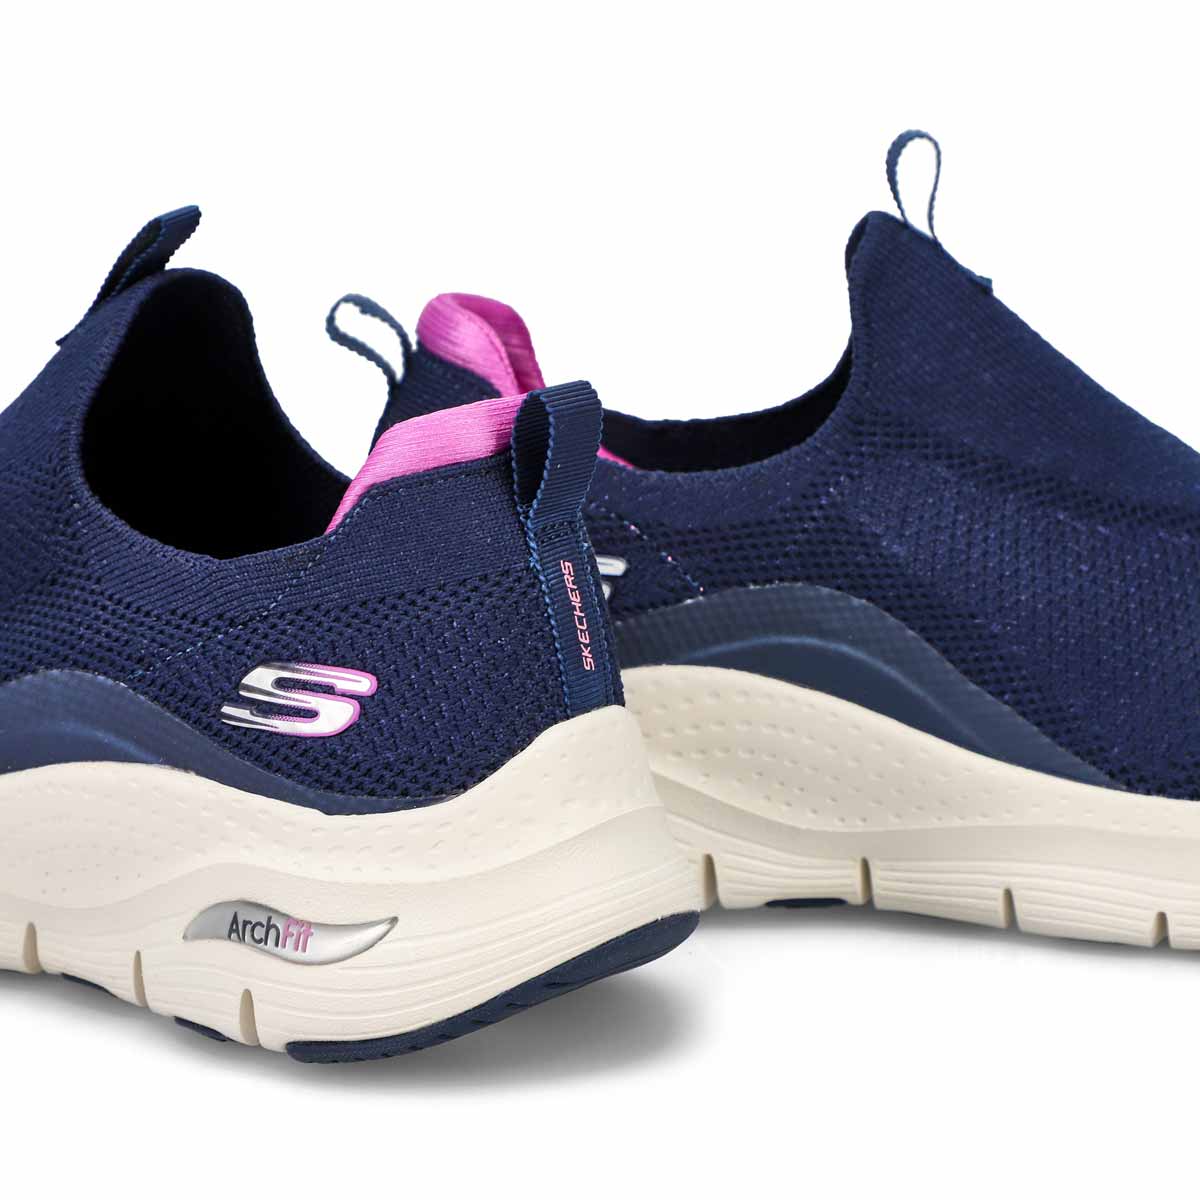 Womens' Arch Fit casual sneaker - navy/purple